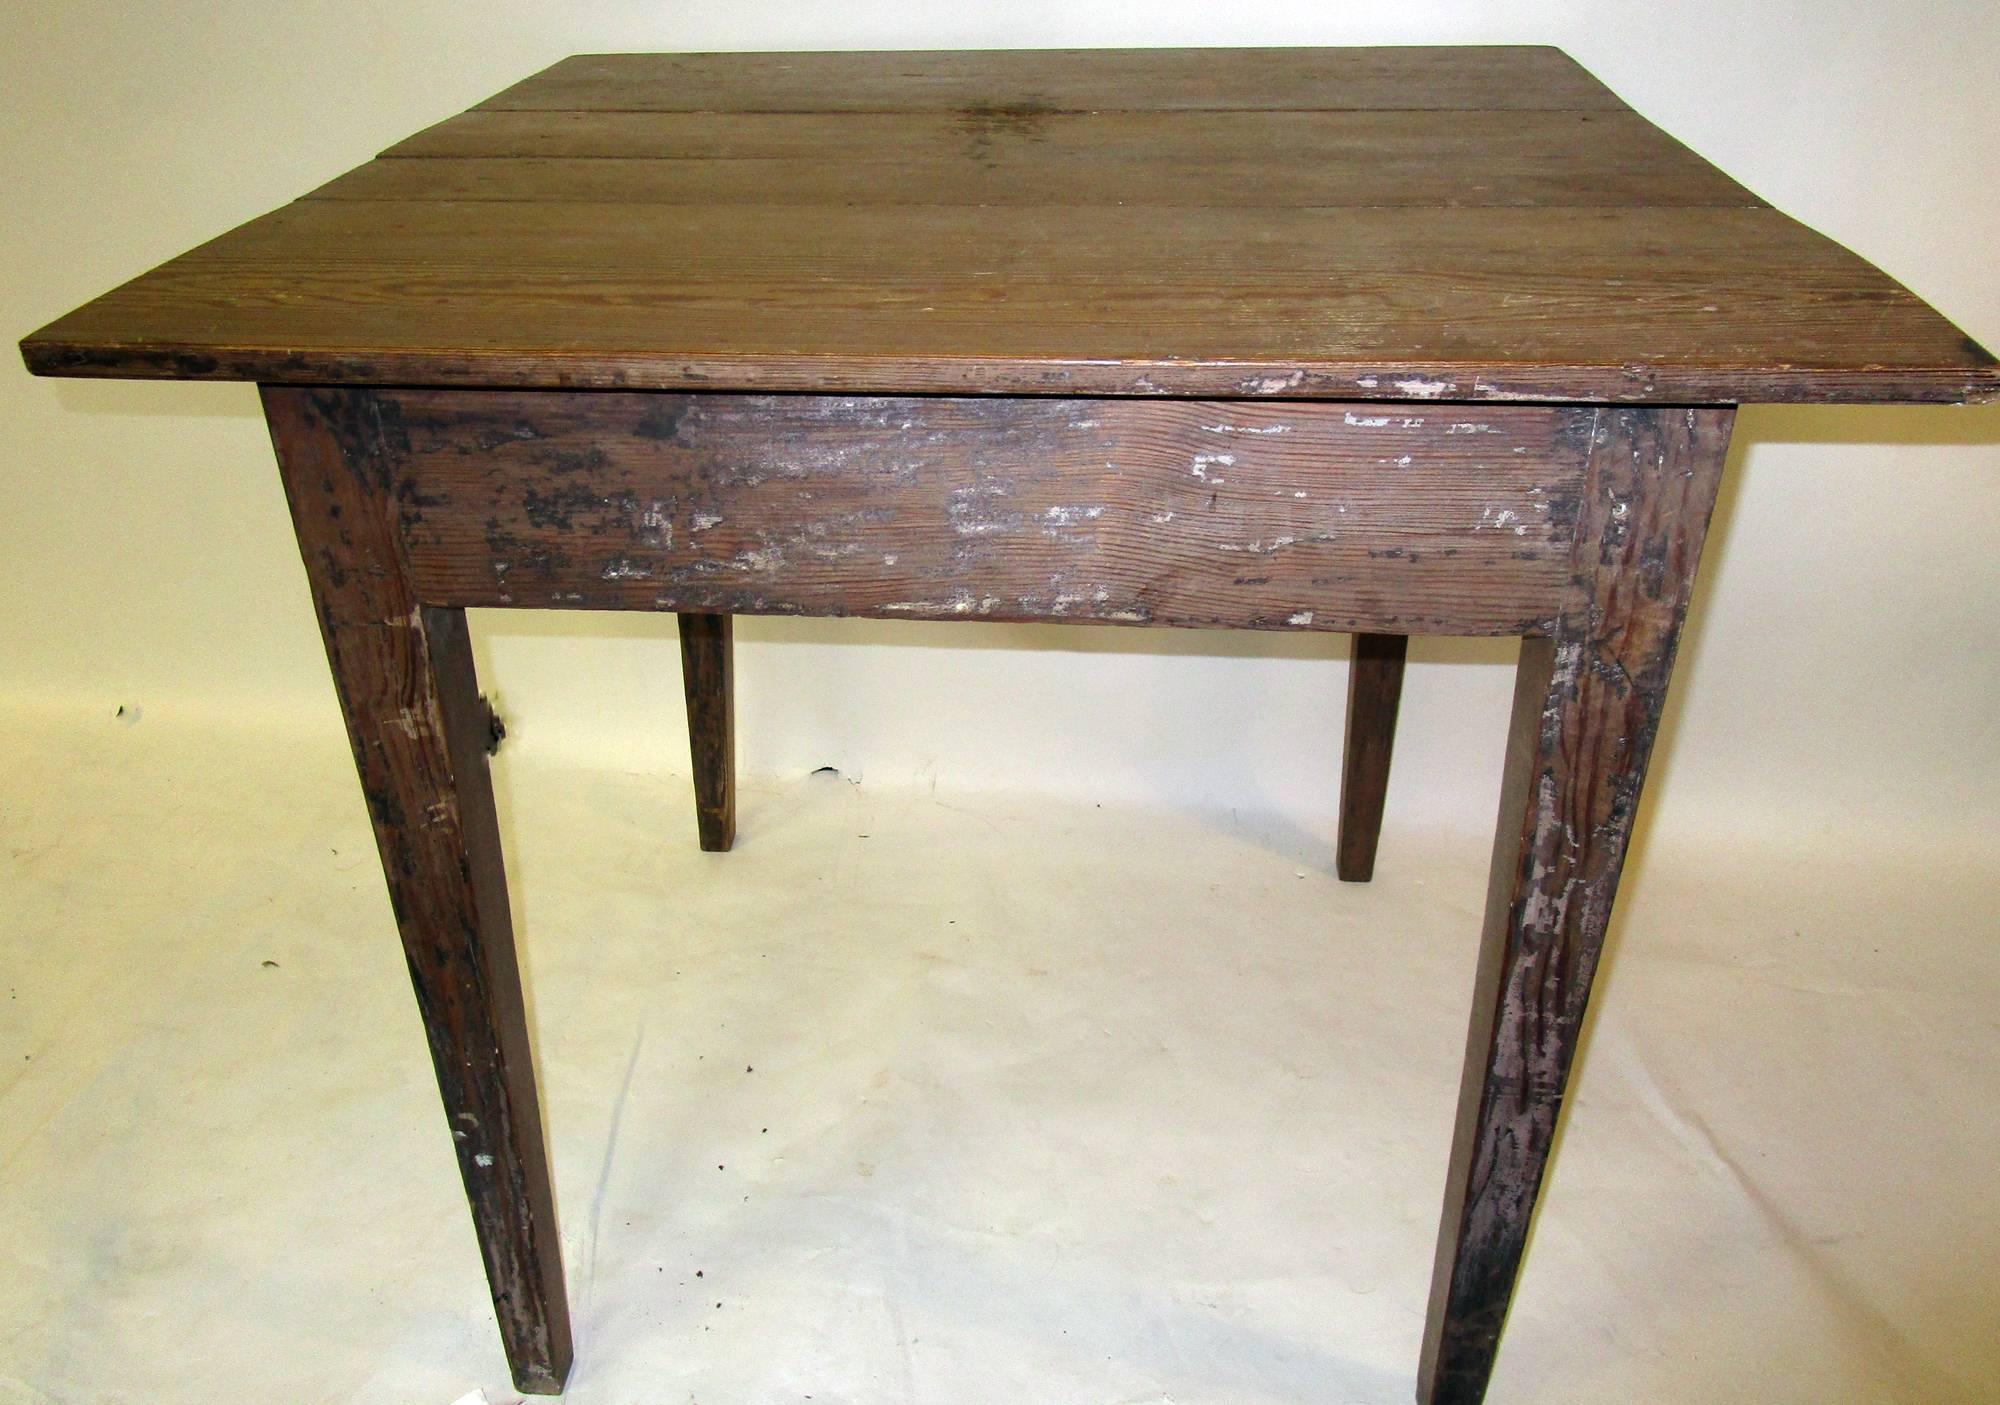 19th century American Primitive Cypress Work Table For Sale 5